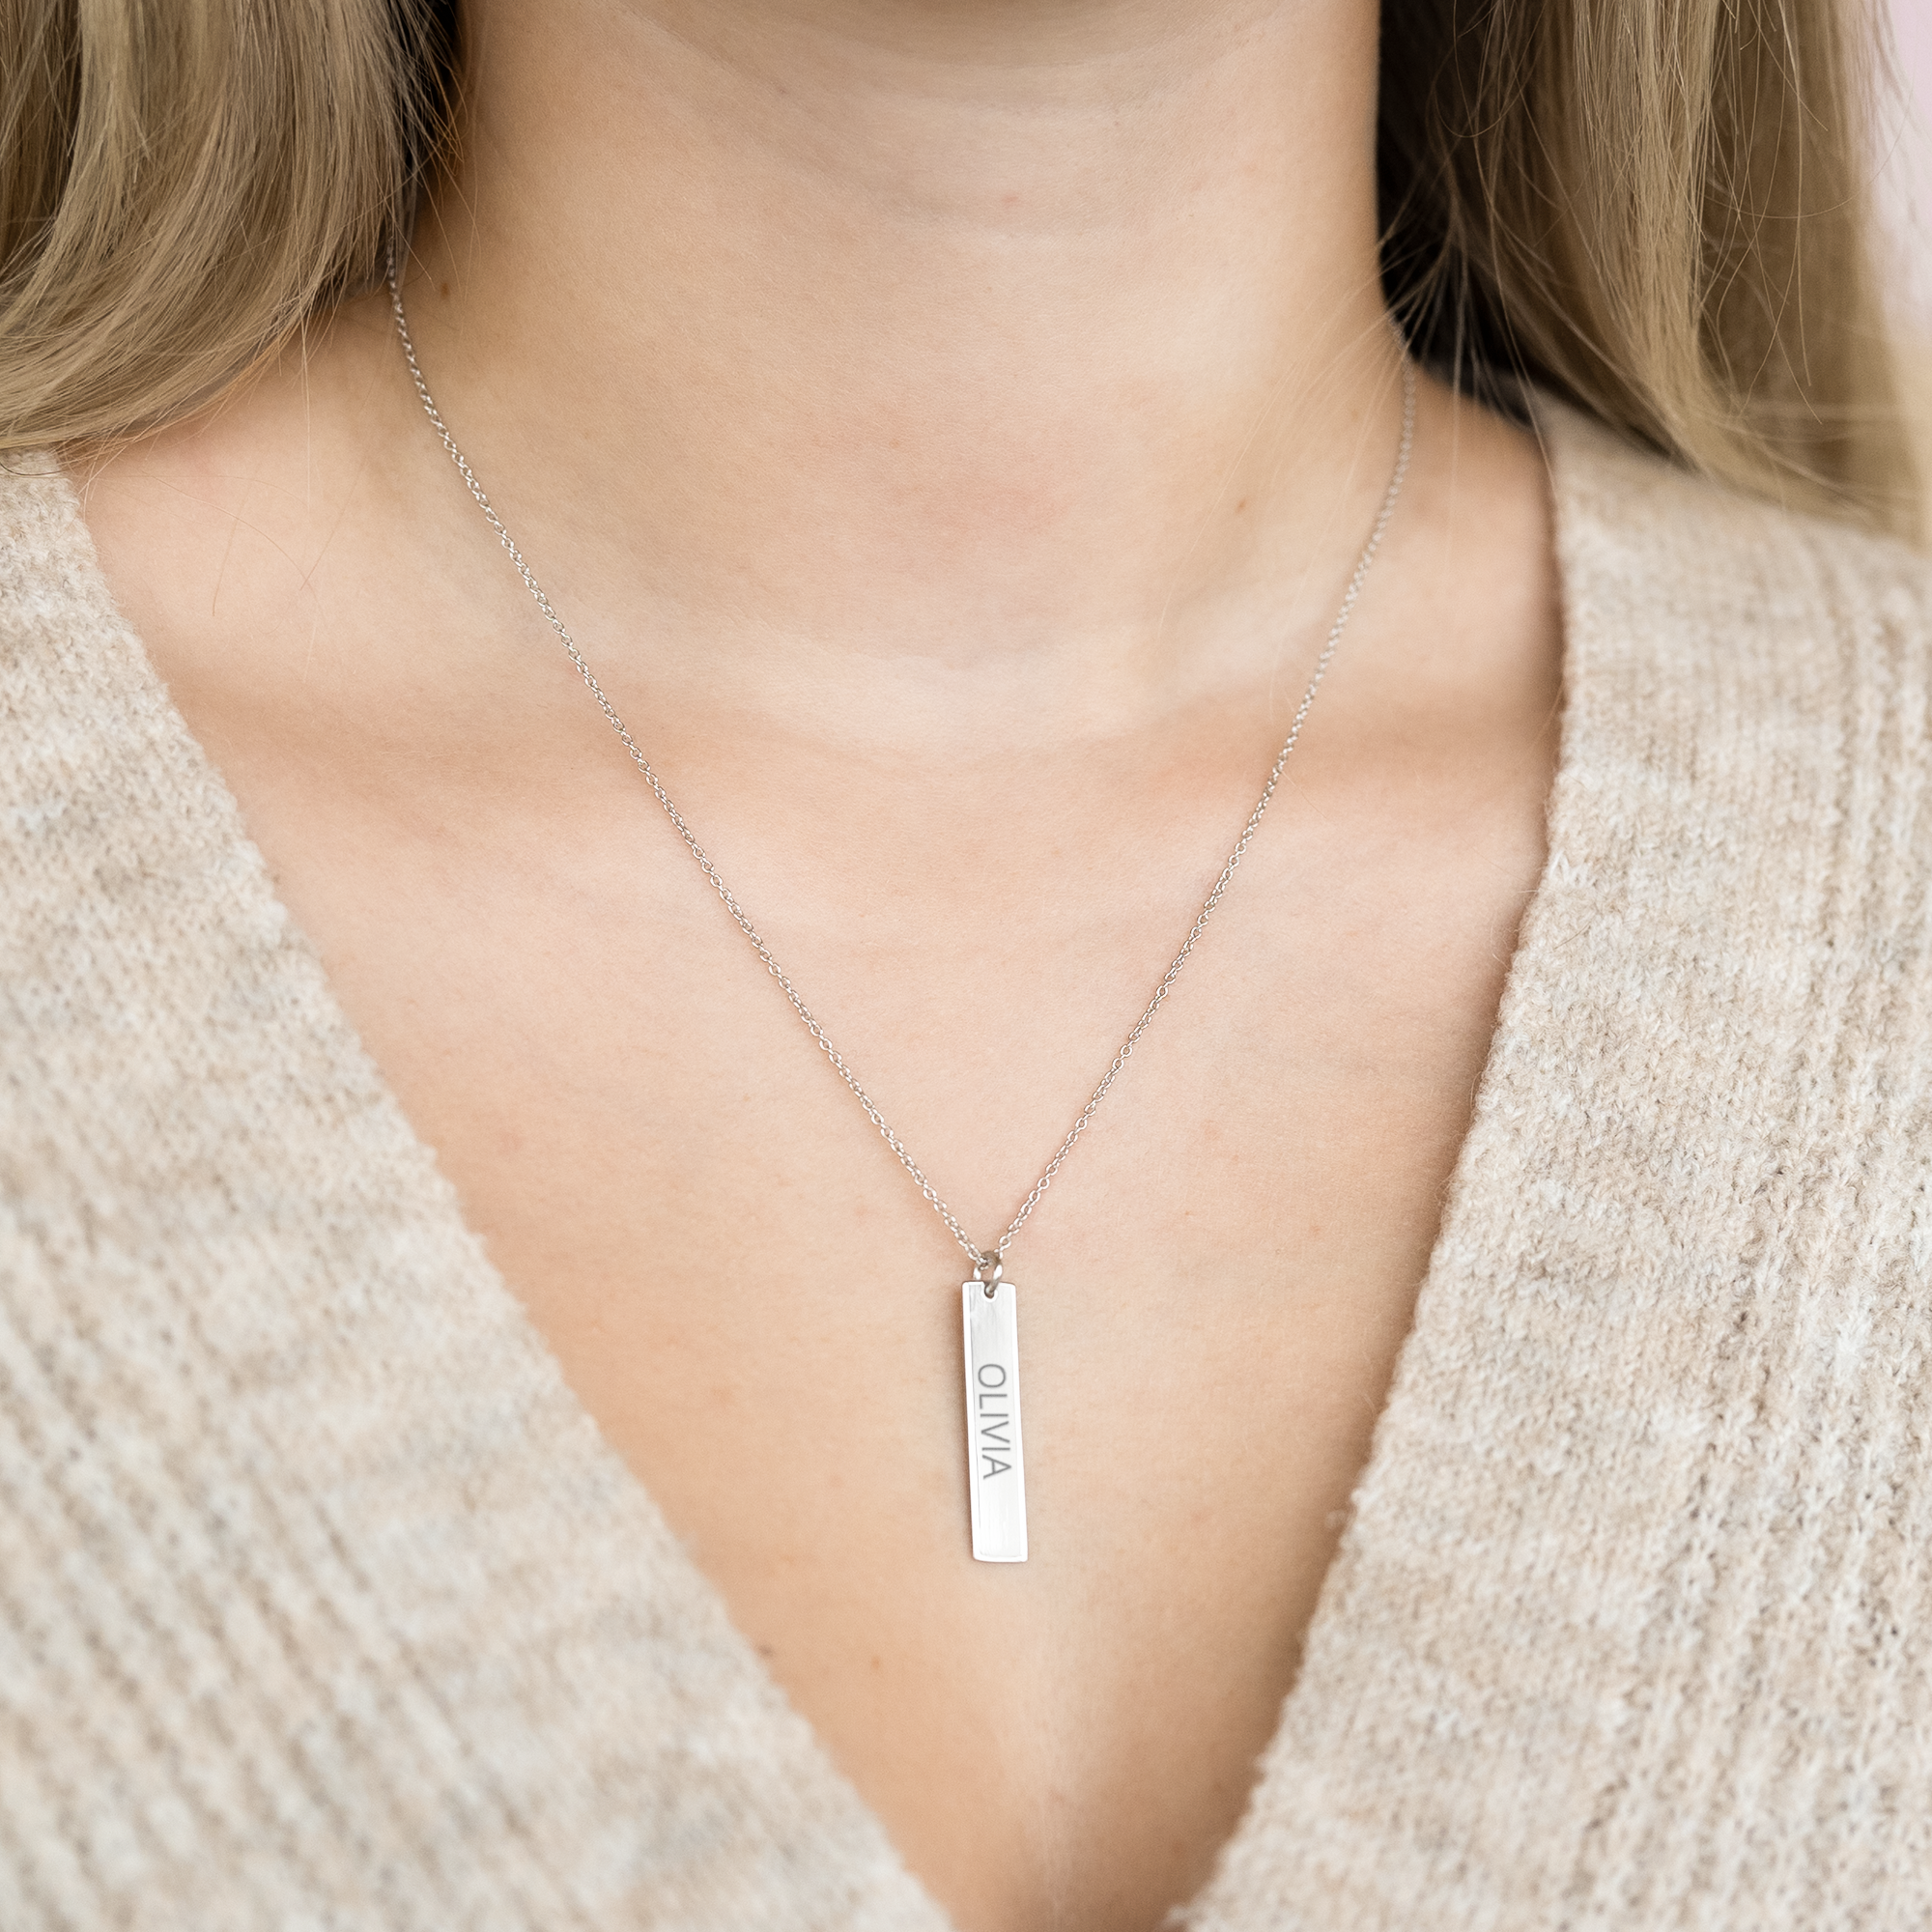 Silver necklace with name - Vertical bar